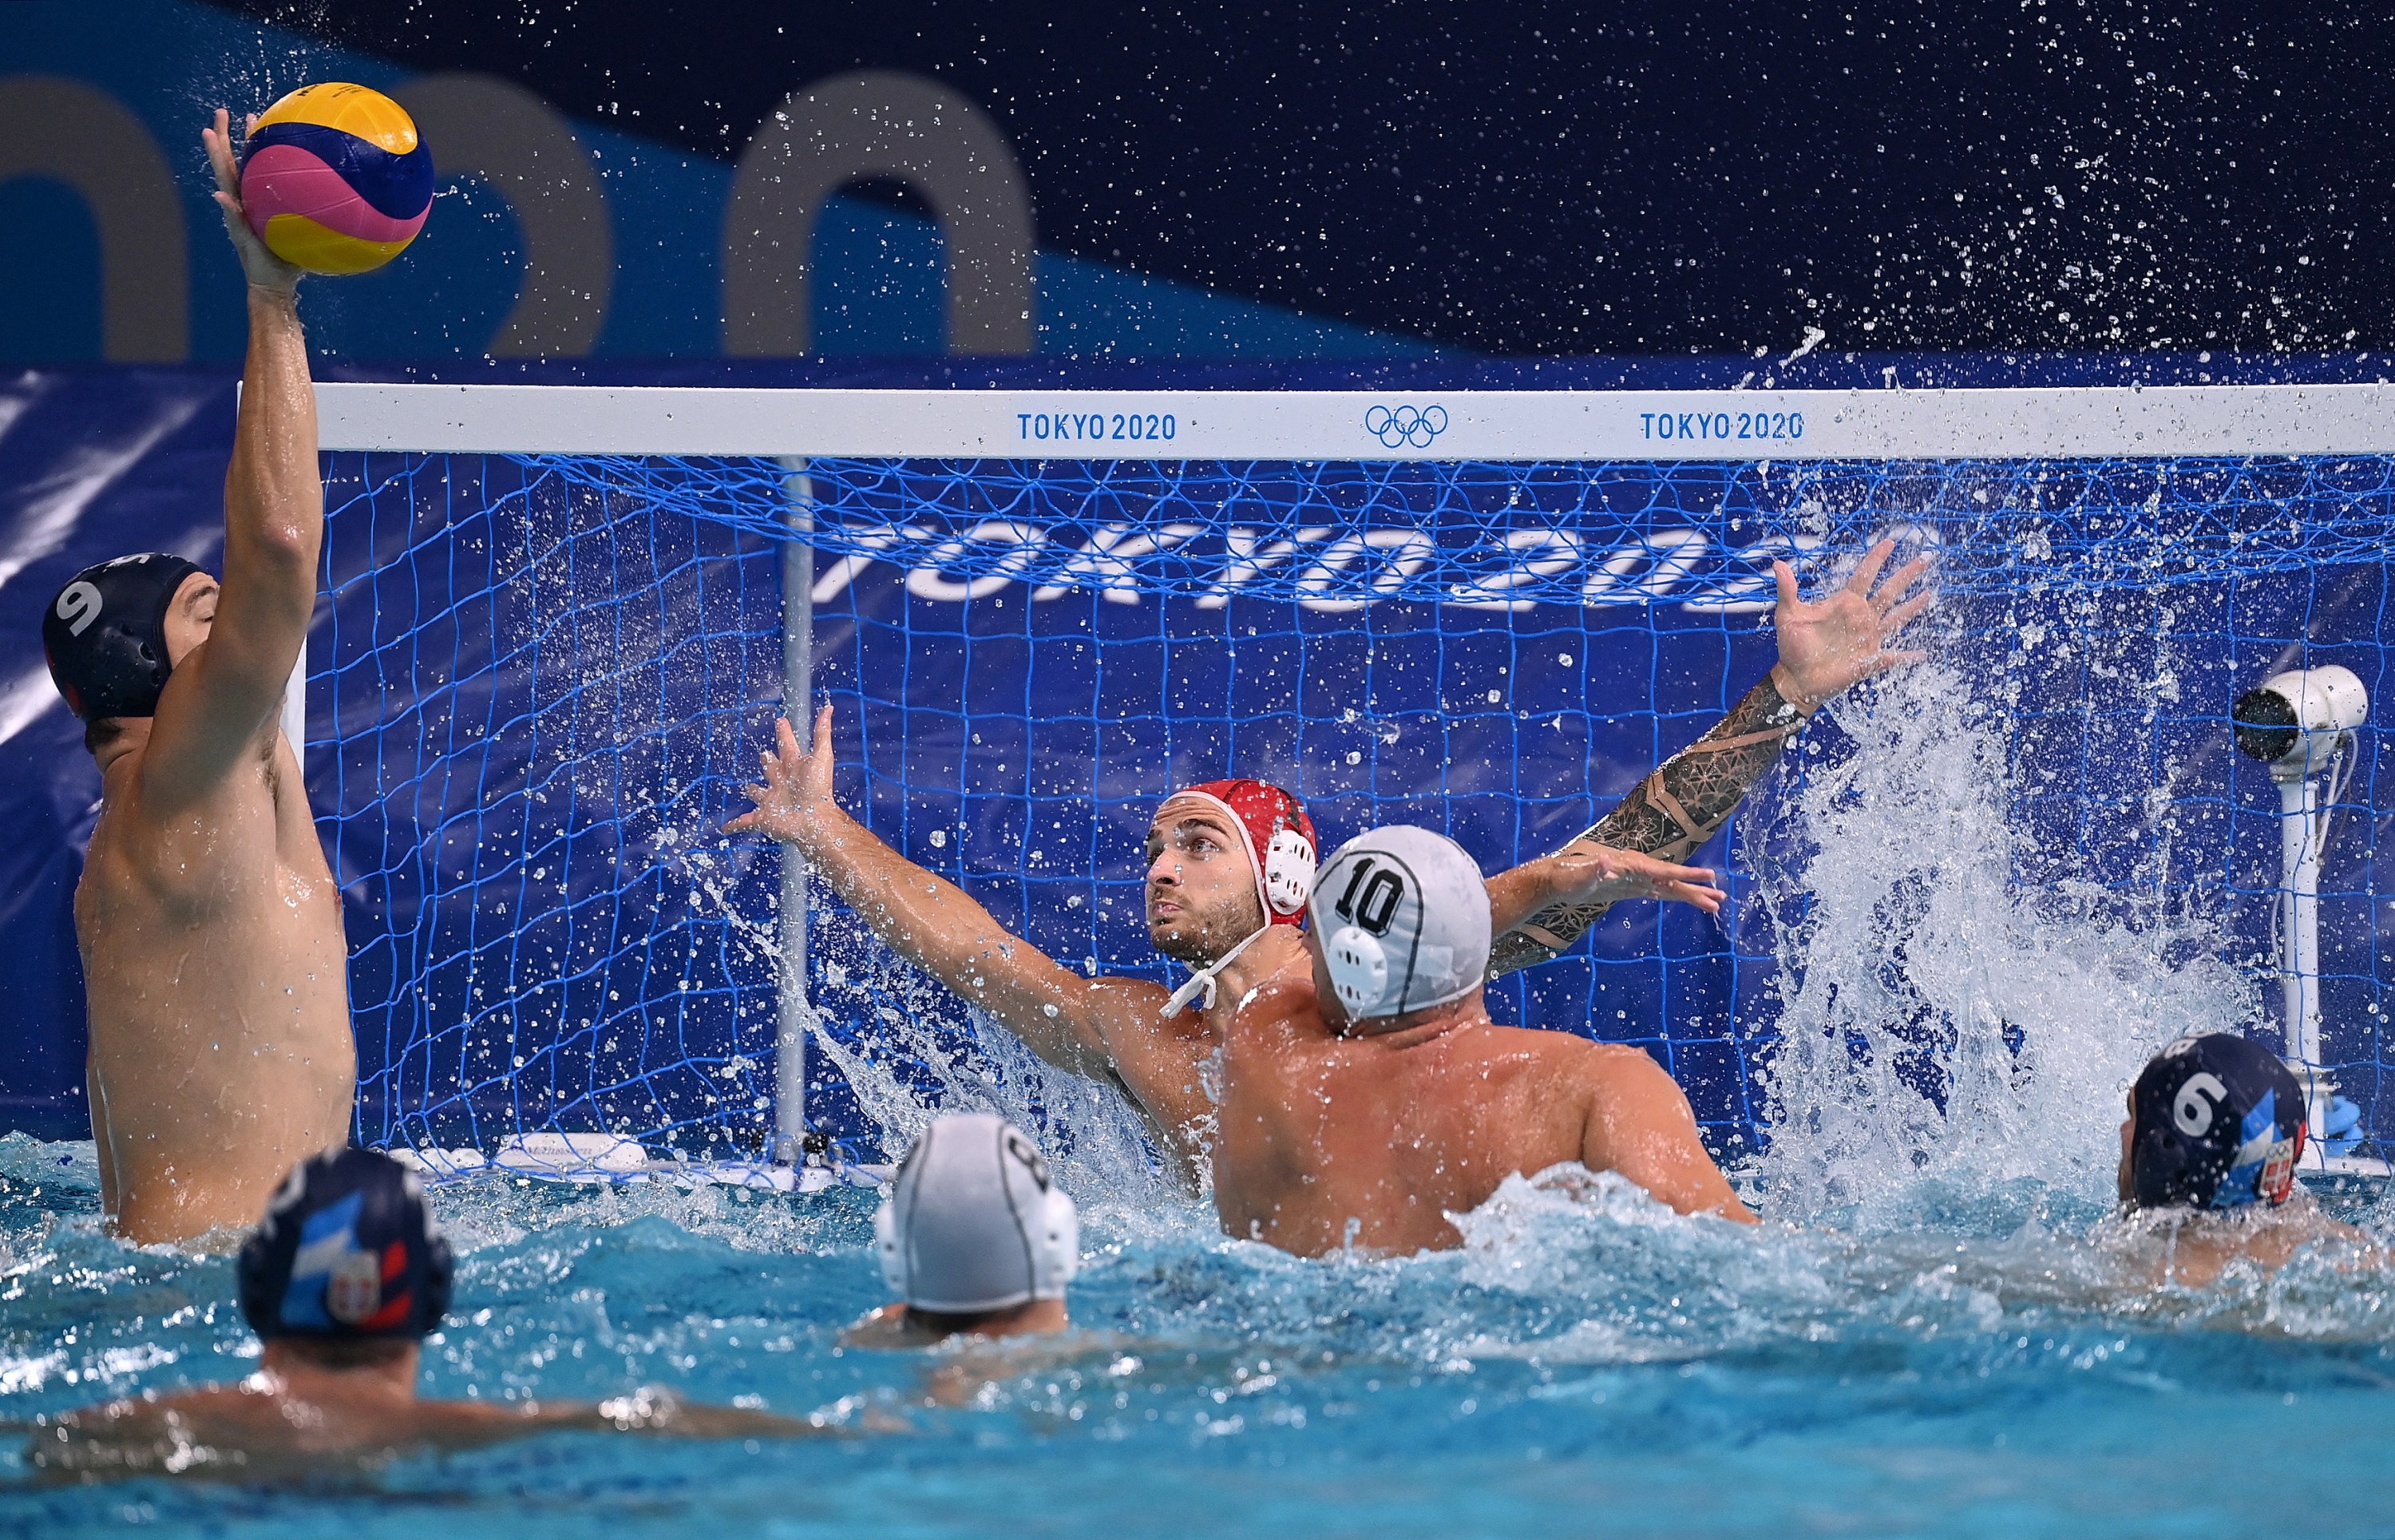 Serbia's Nikola Jaksic (L) shoots to score during the Tokyo 2020 Olympic Games men's water polo gold medal match between Greece and Serbia at the Tatsumi Water Polo Centre in Tokyo on August 8, 2021. (Photo by Angela WEISS / AFP)